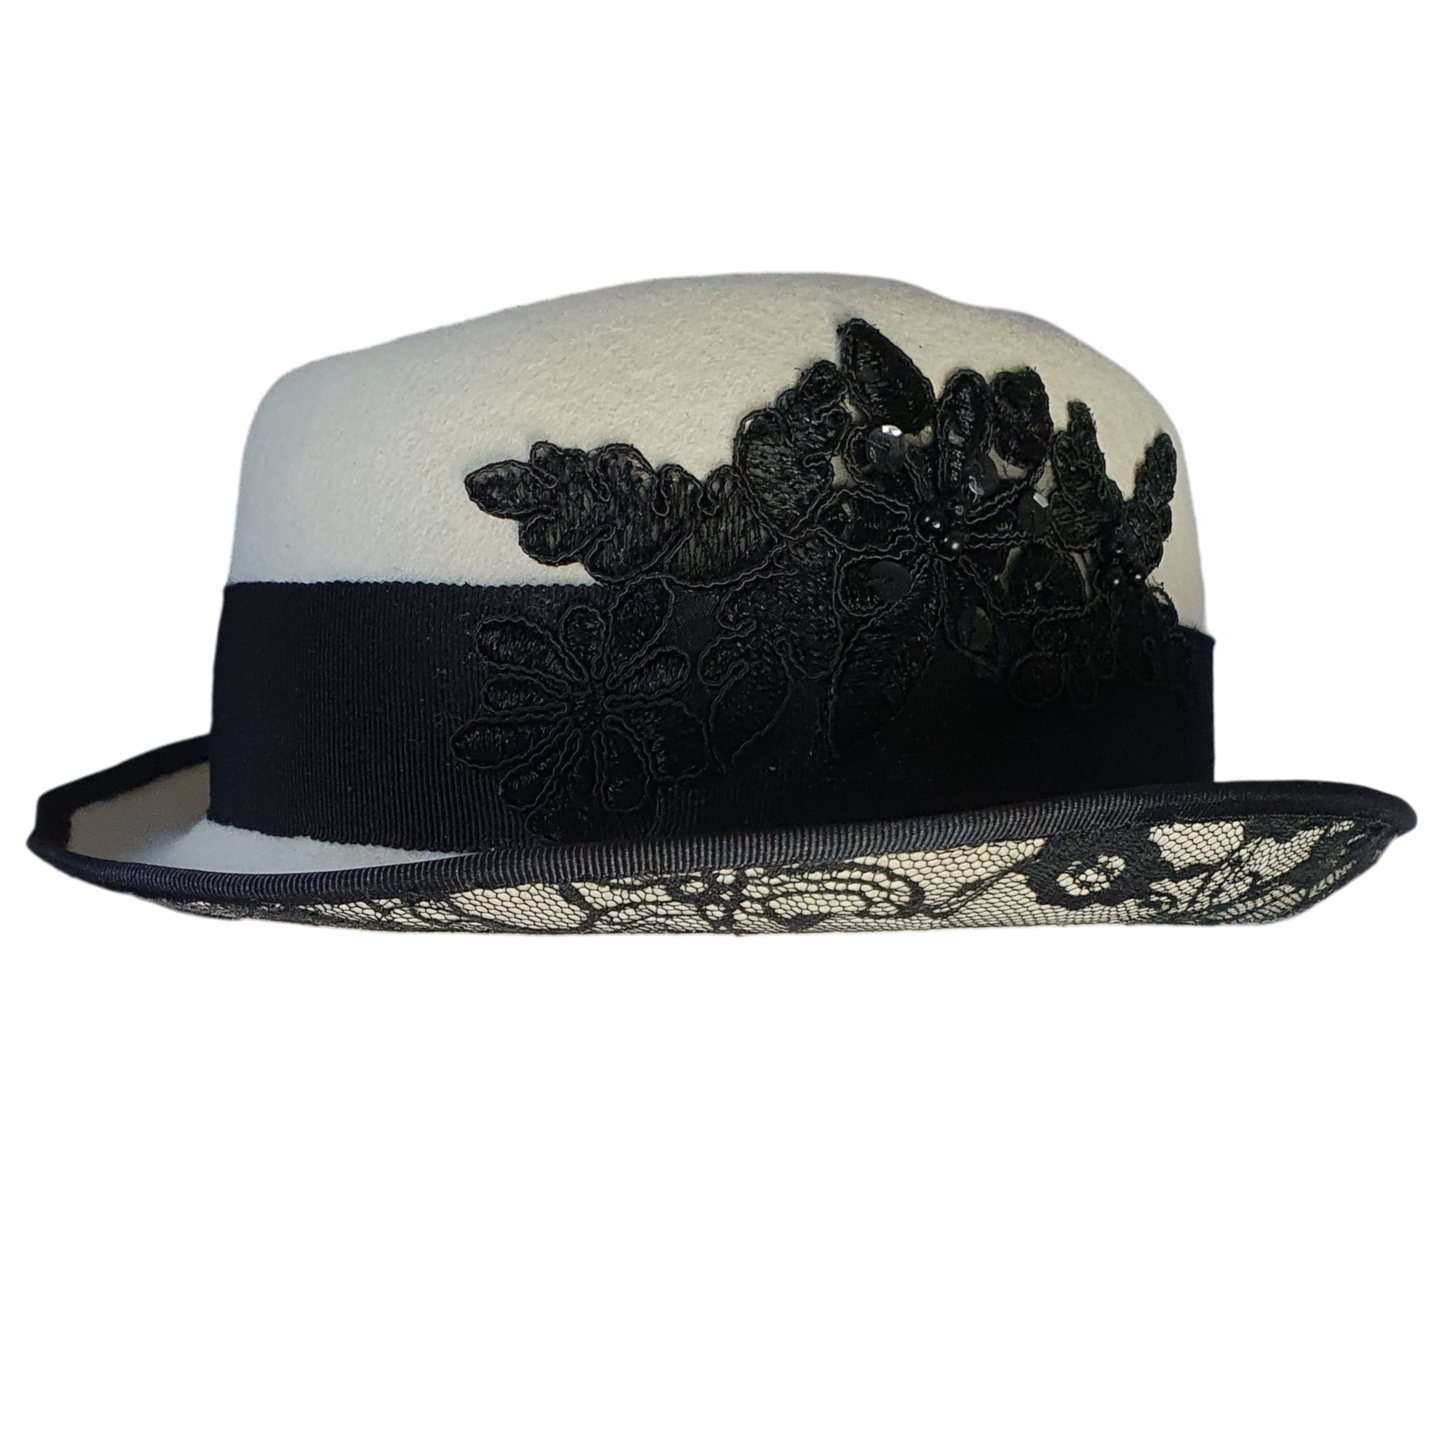 Handmade felt hat black and white, elegant vintage hat fedora with lace -Perfect for autumn &amp; winter and special occasions